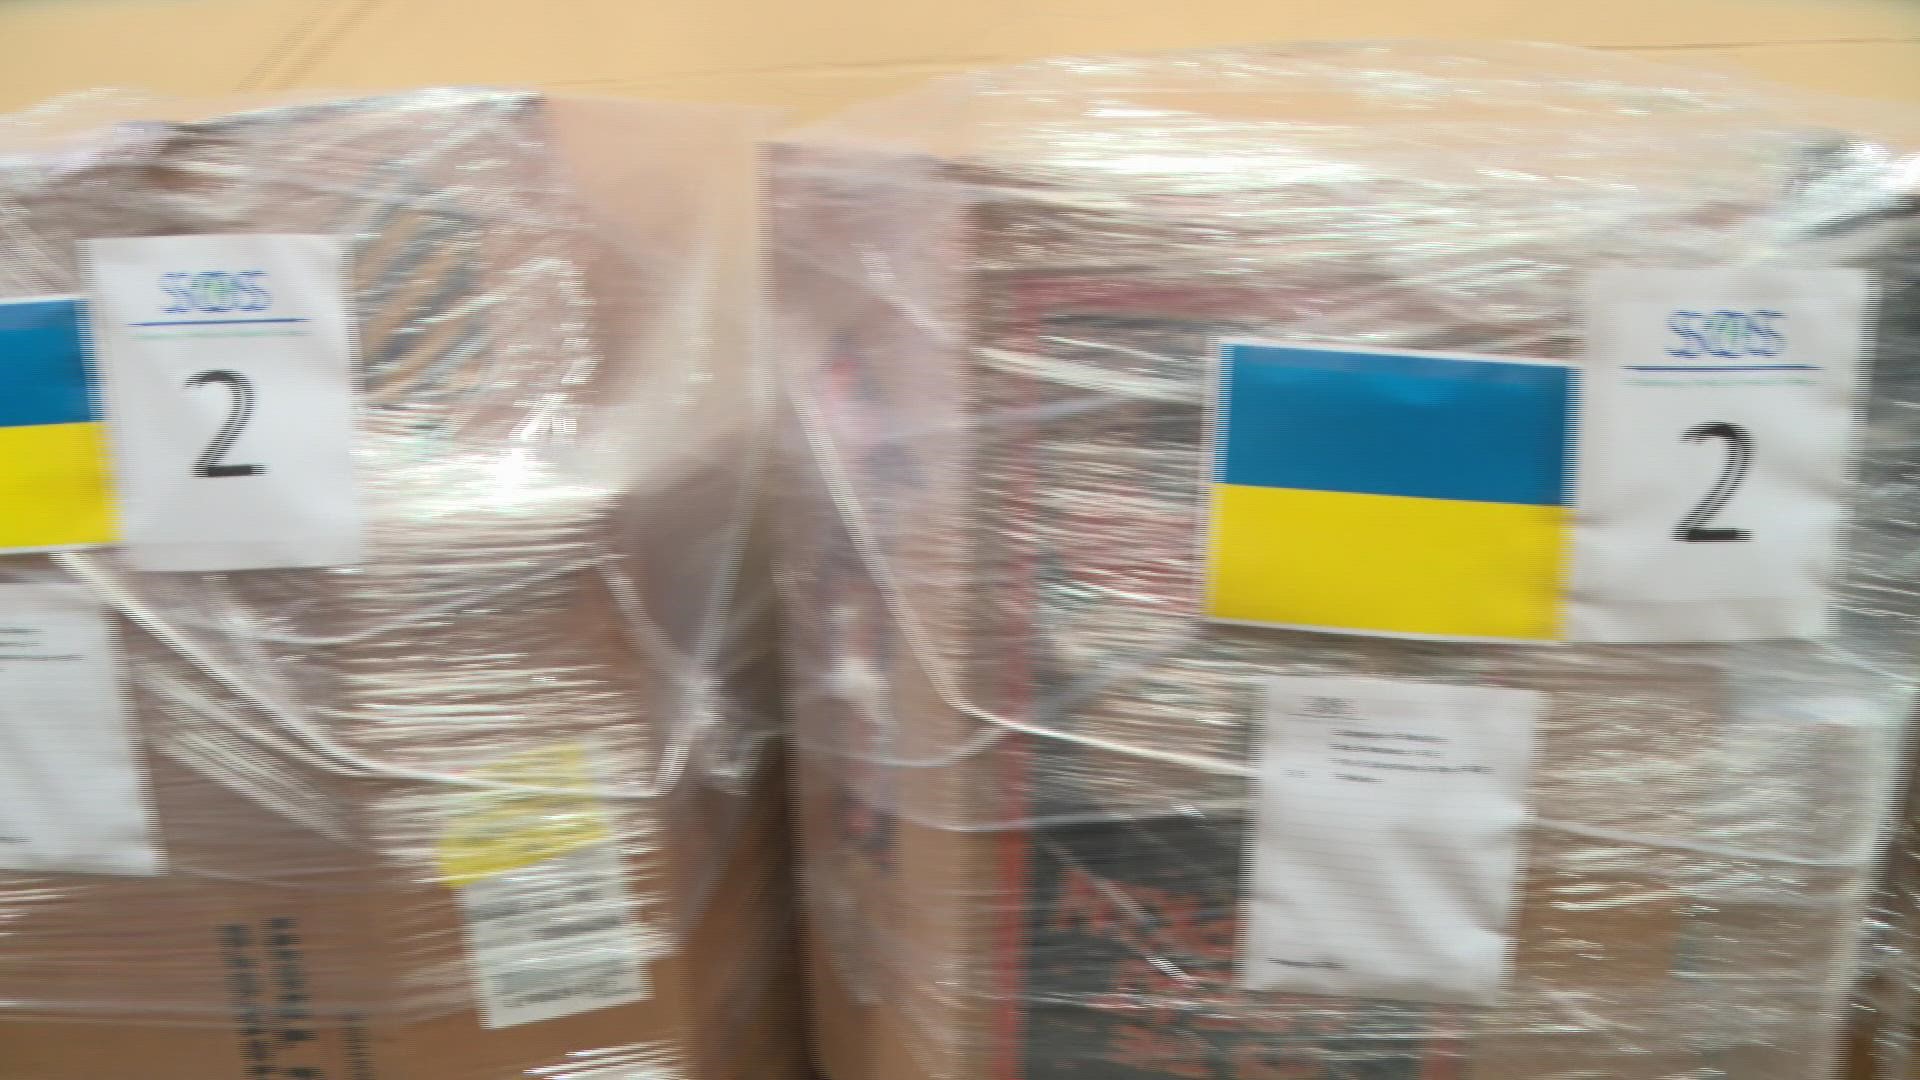 Leaders say this is their largest shipment to Ukraine yet, and is sending $200,000 worth of aid to those who are suffering from daily attacks.